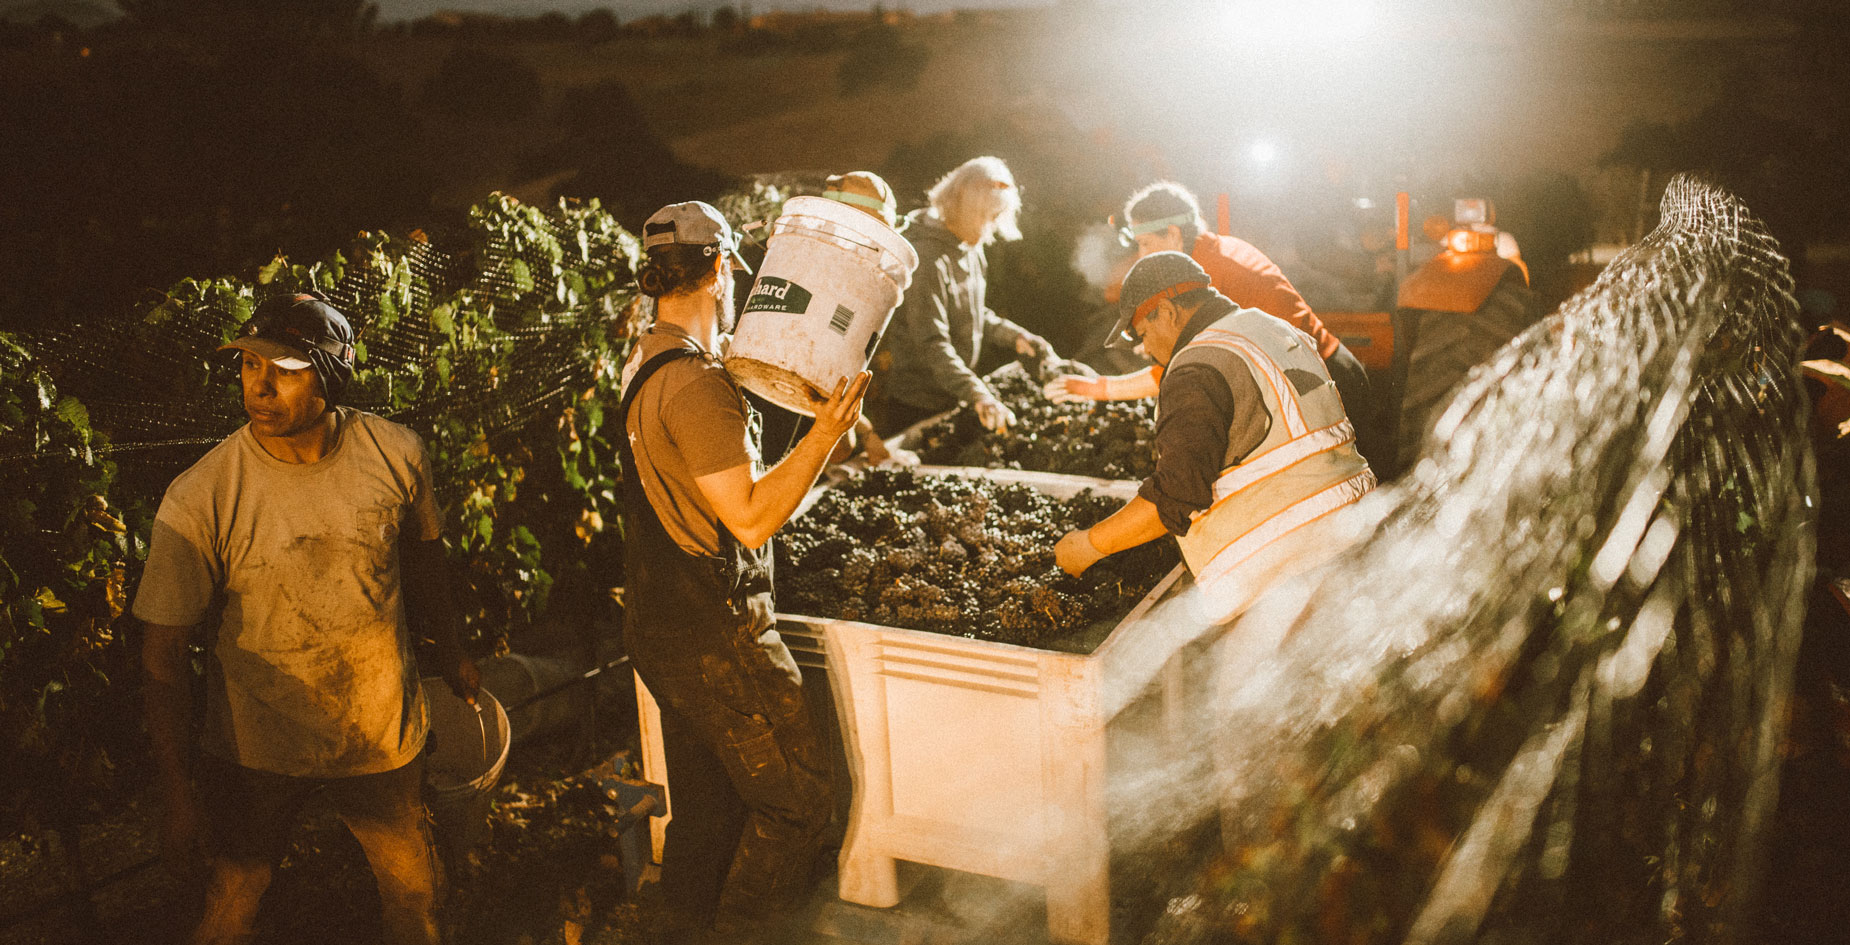 Harvesting our vineyards by hand means early mornings and a large crew - it takes a village!